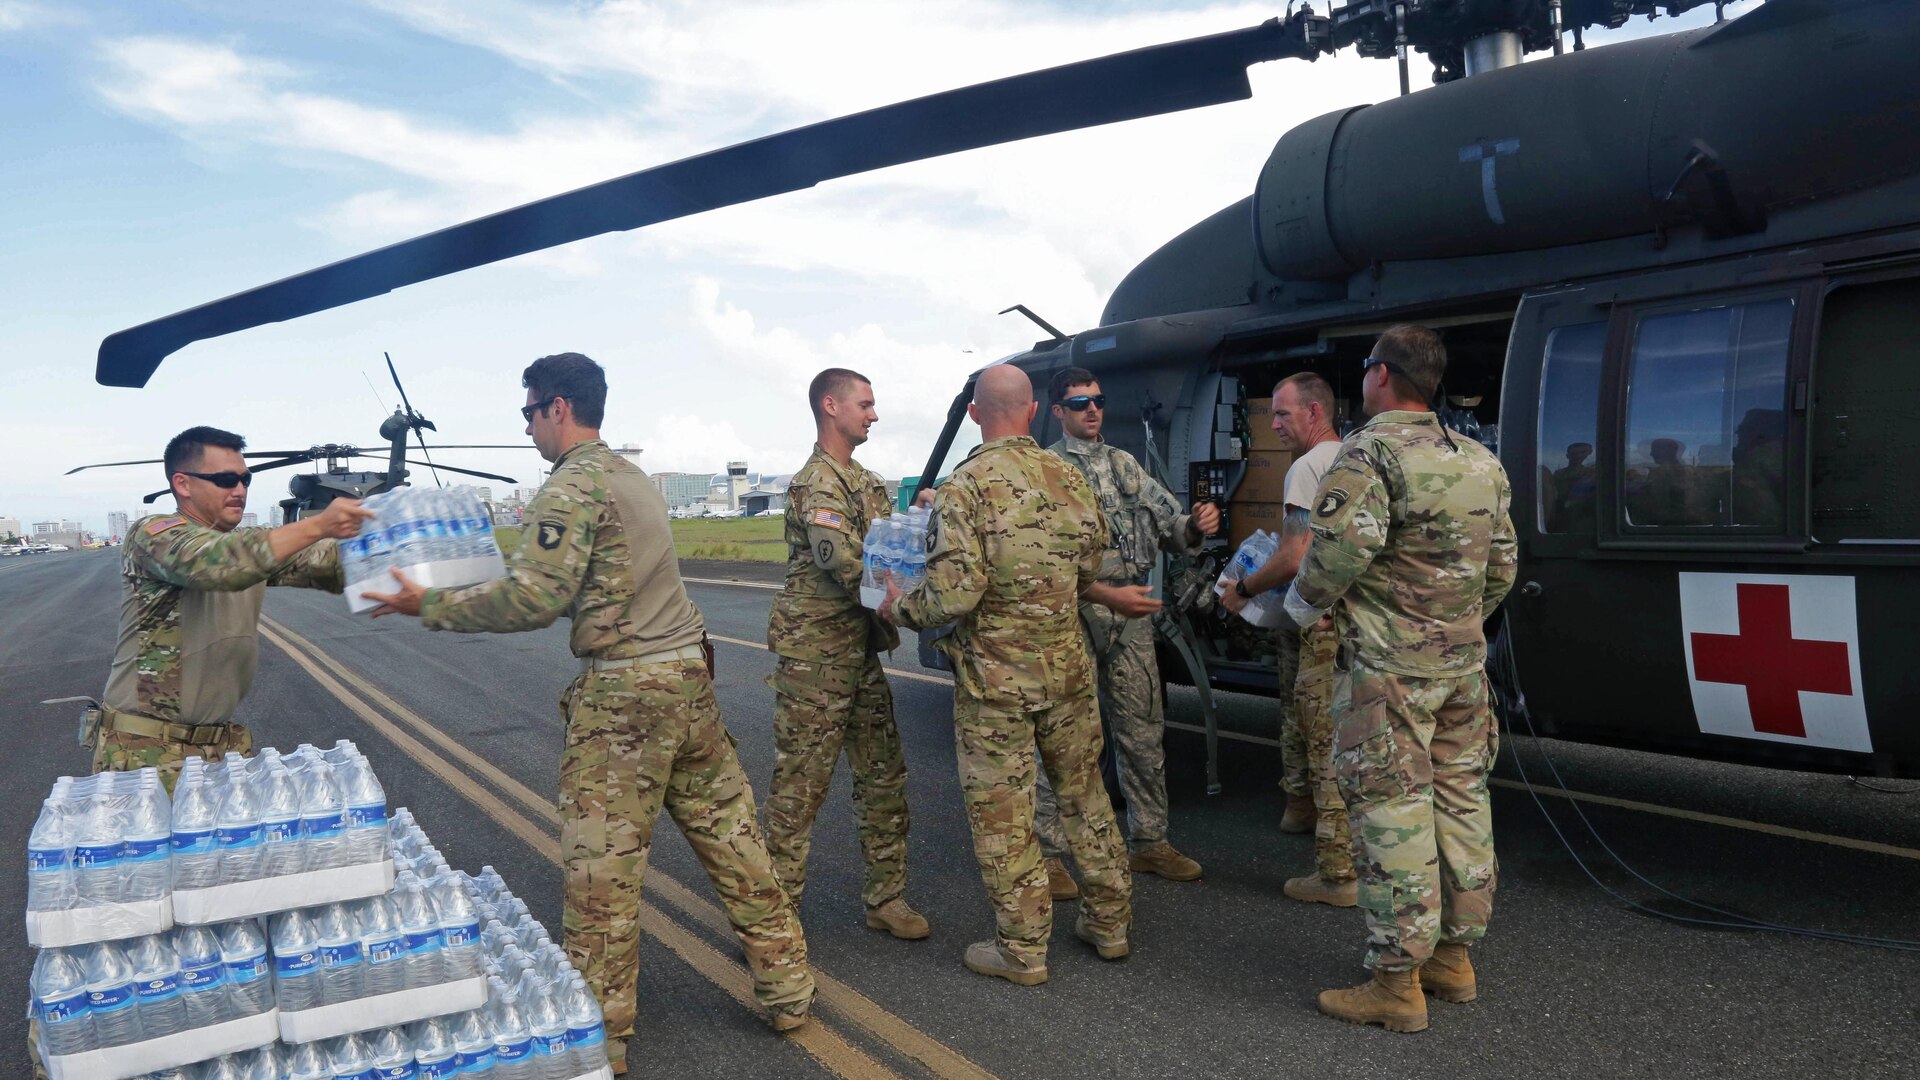 A group of service members hand off water cases to each other next to a helicopter.